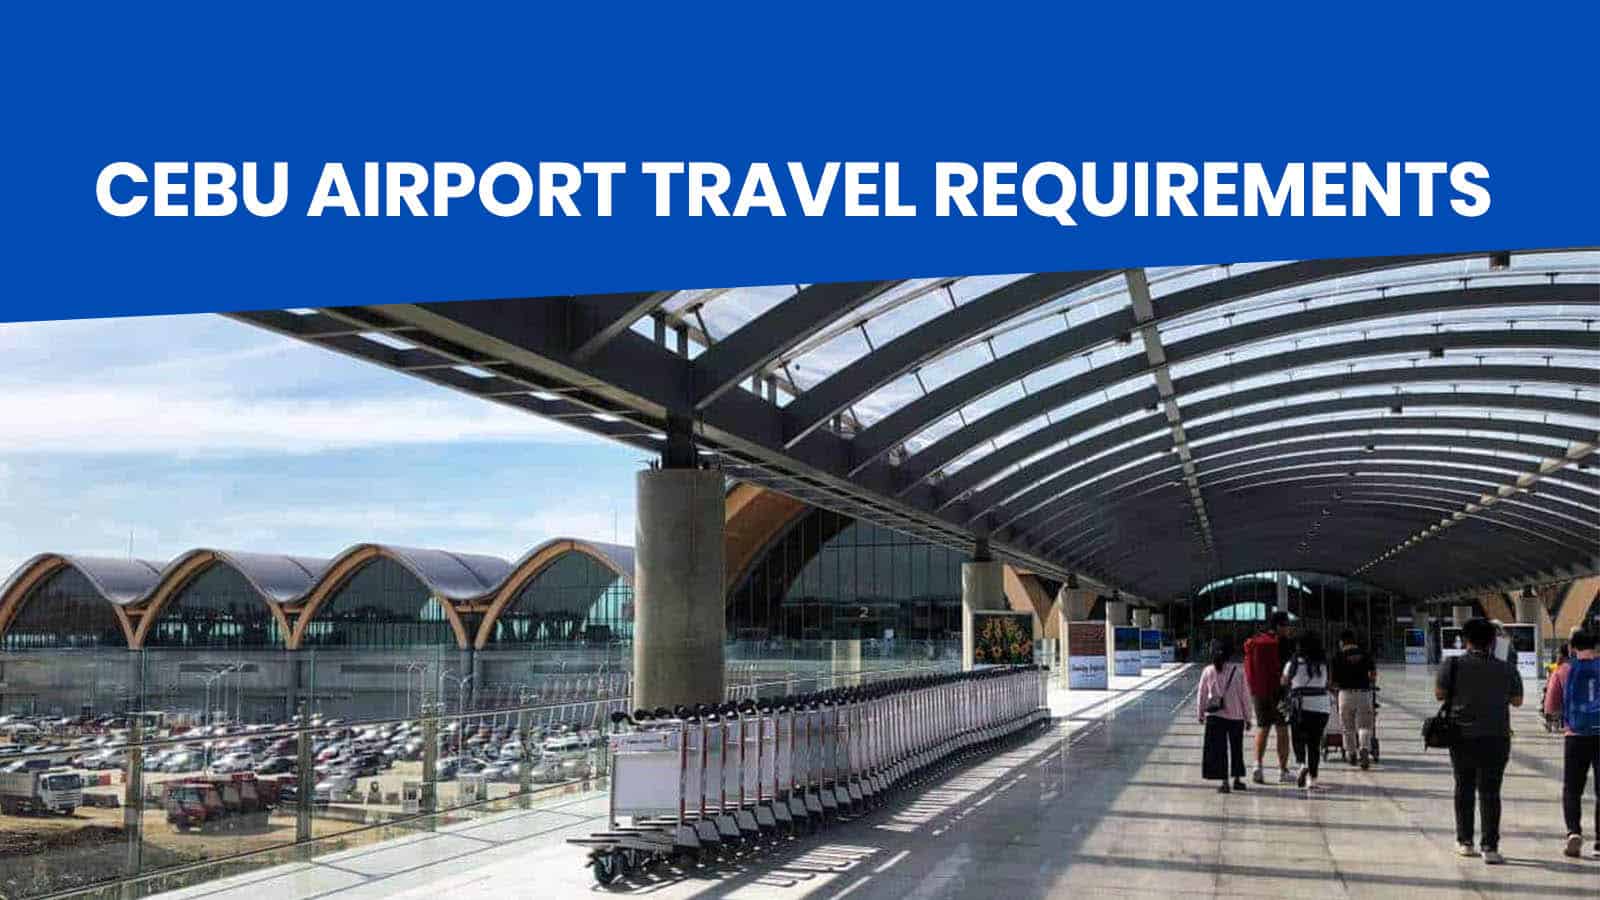 CEBU AIRPORT: List of Requirements for Domestic Travel (Arrival)